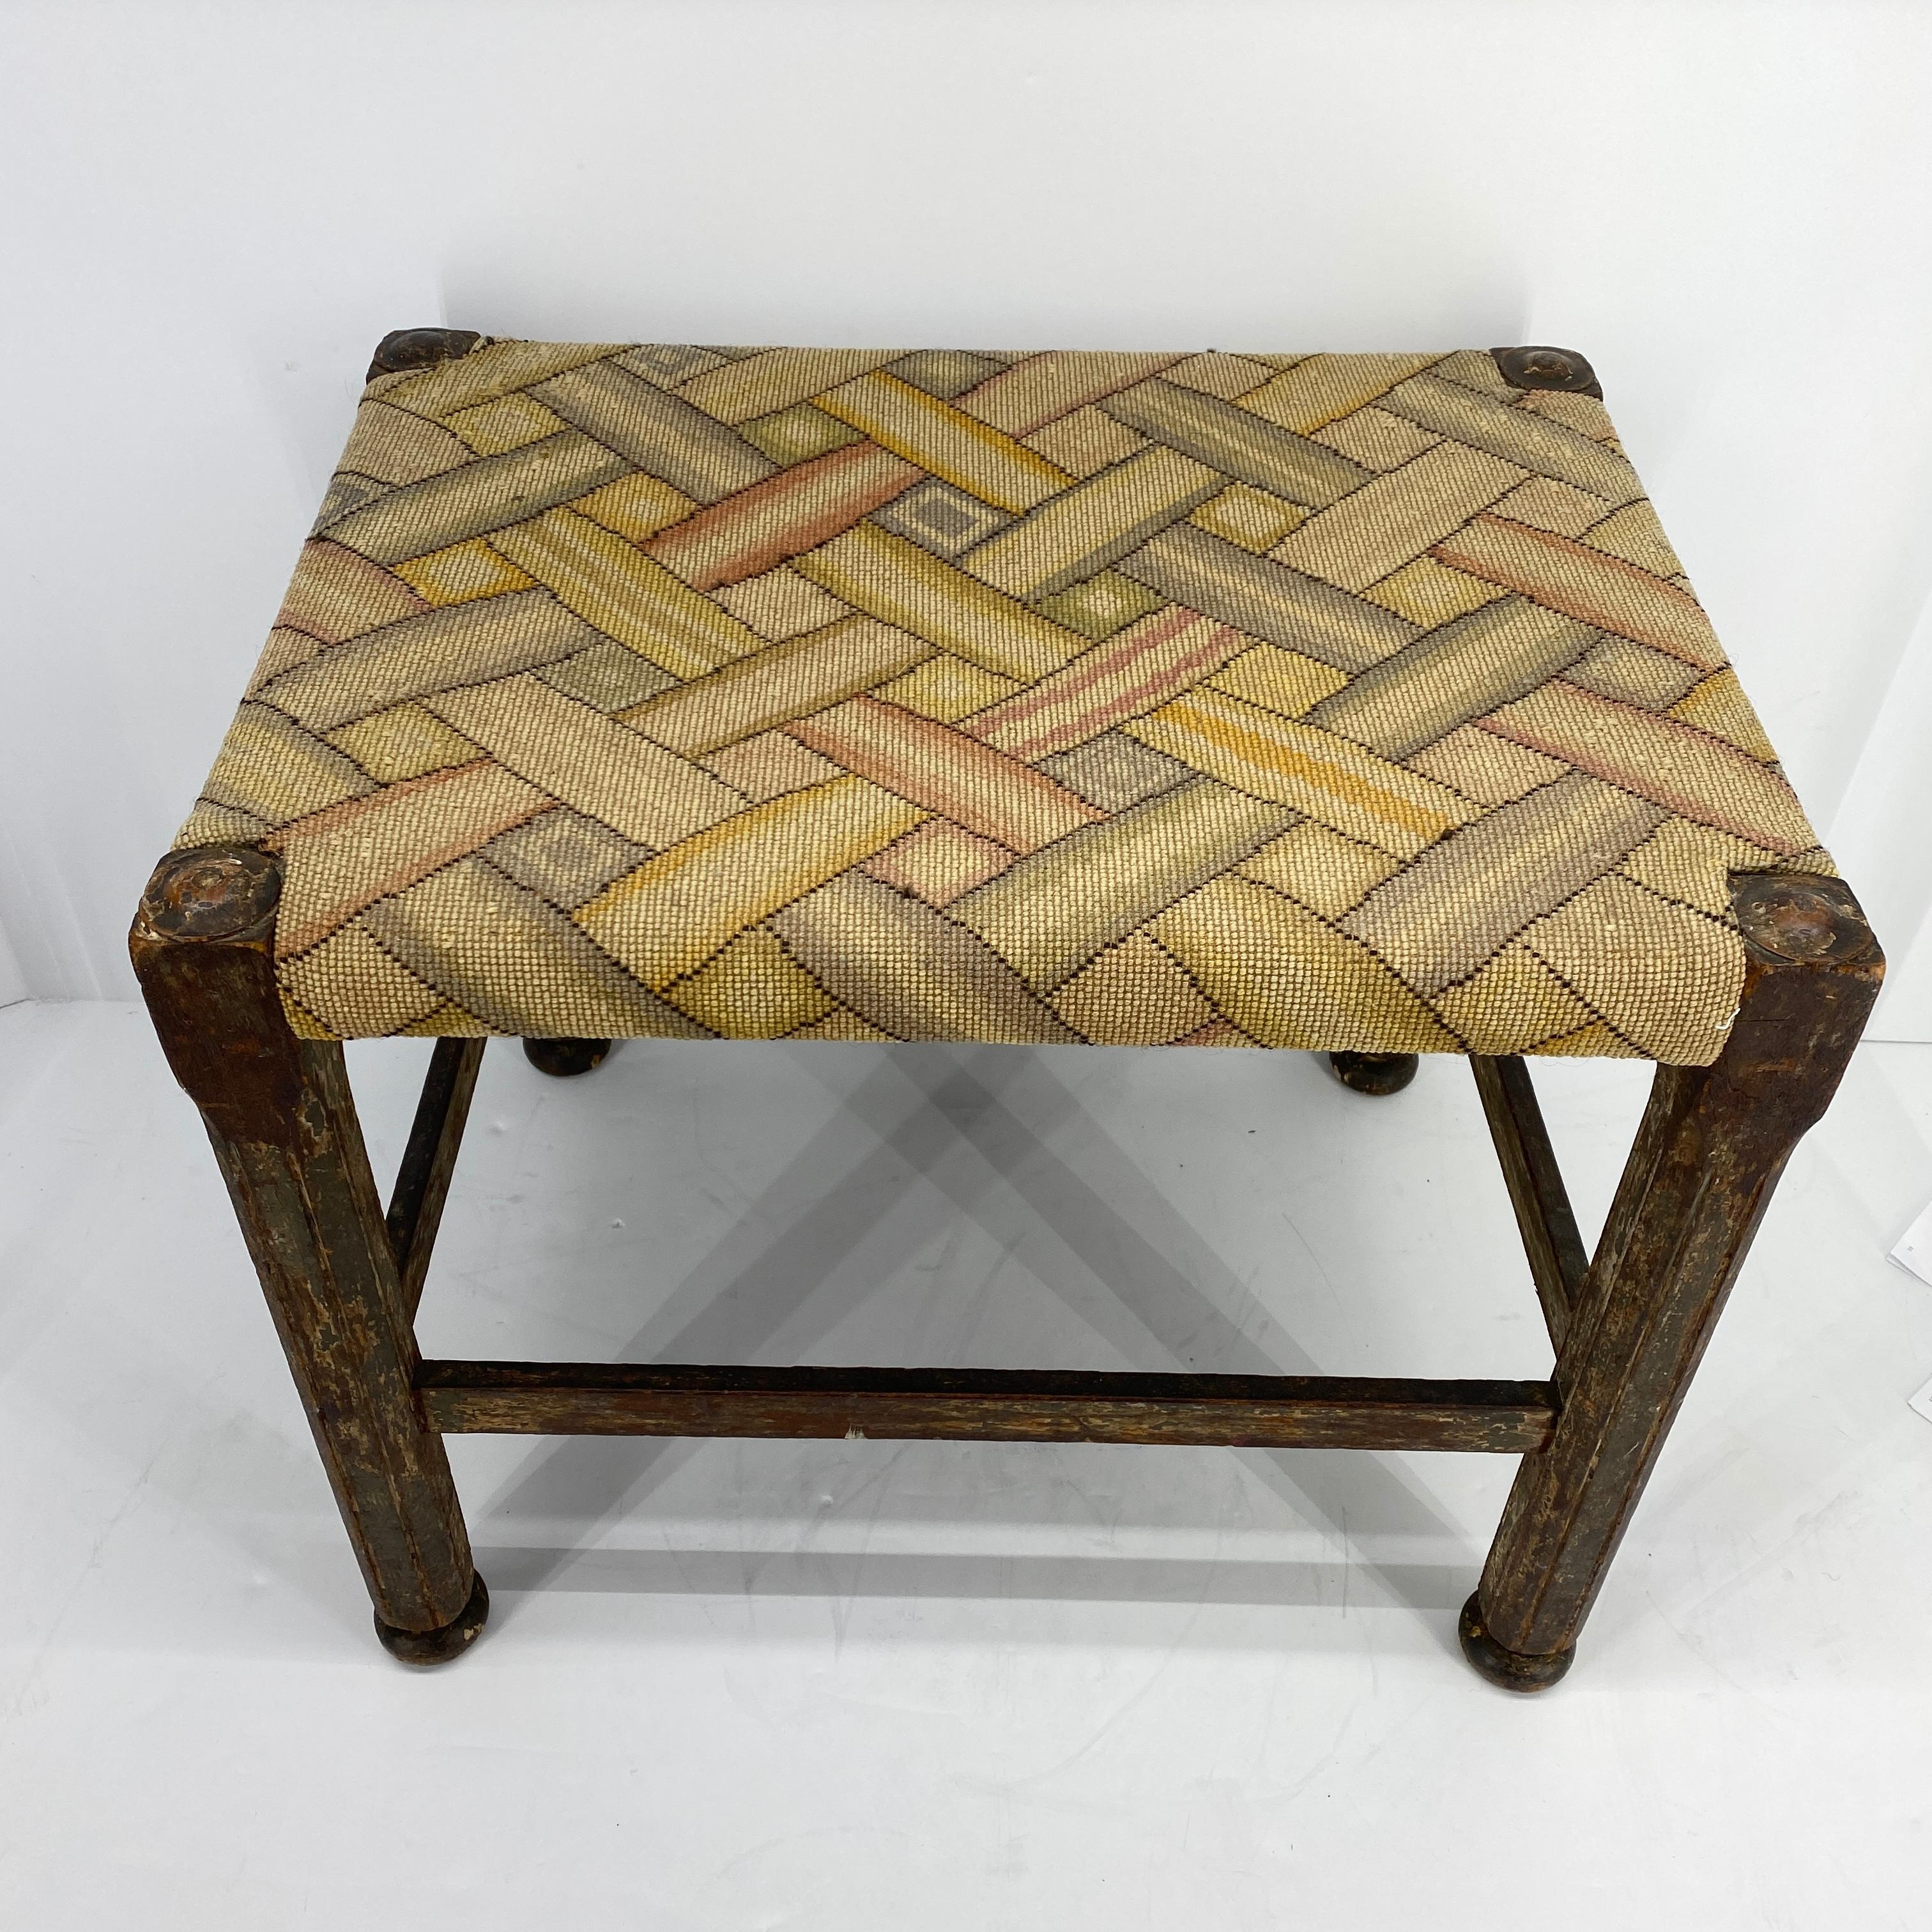 American Folk Art Footstool with Woven Seat